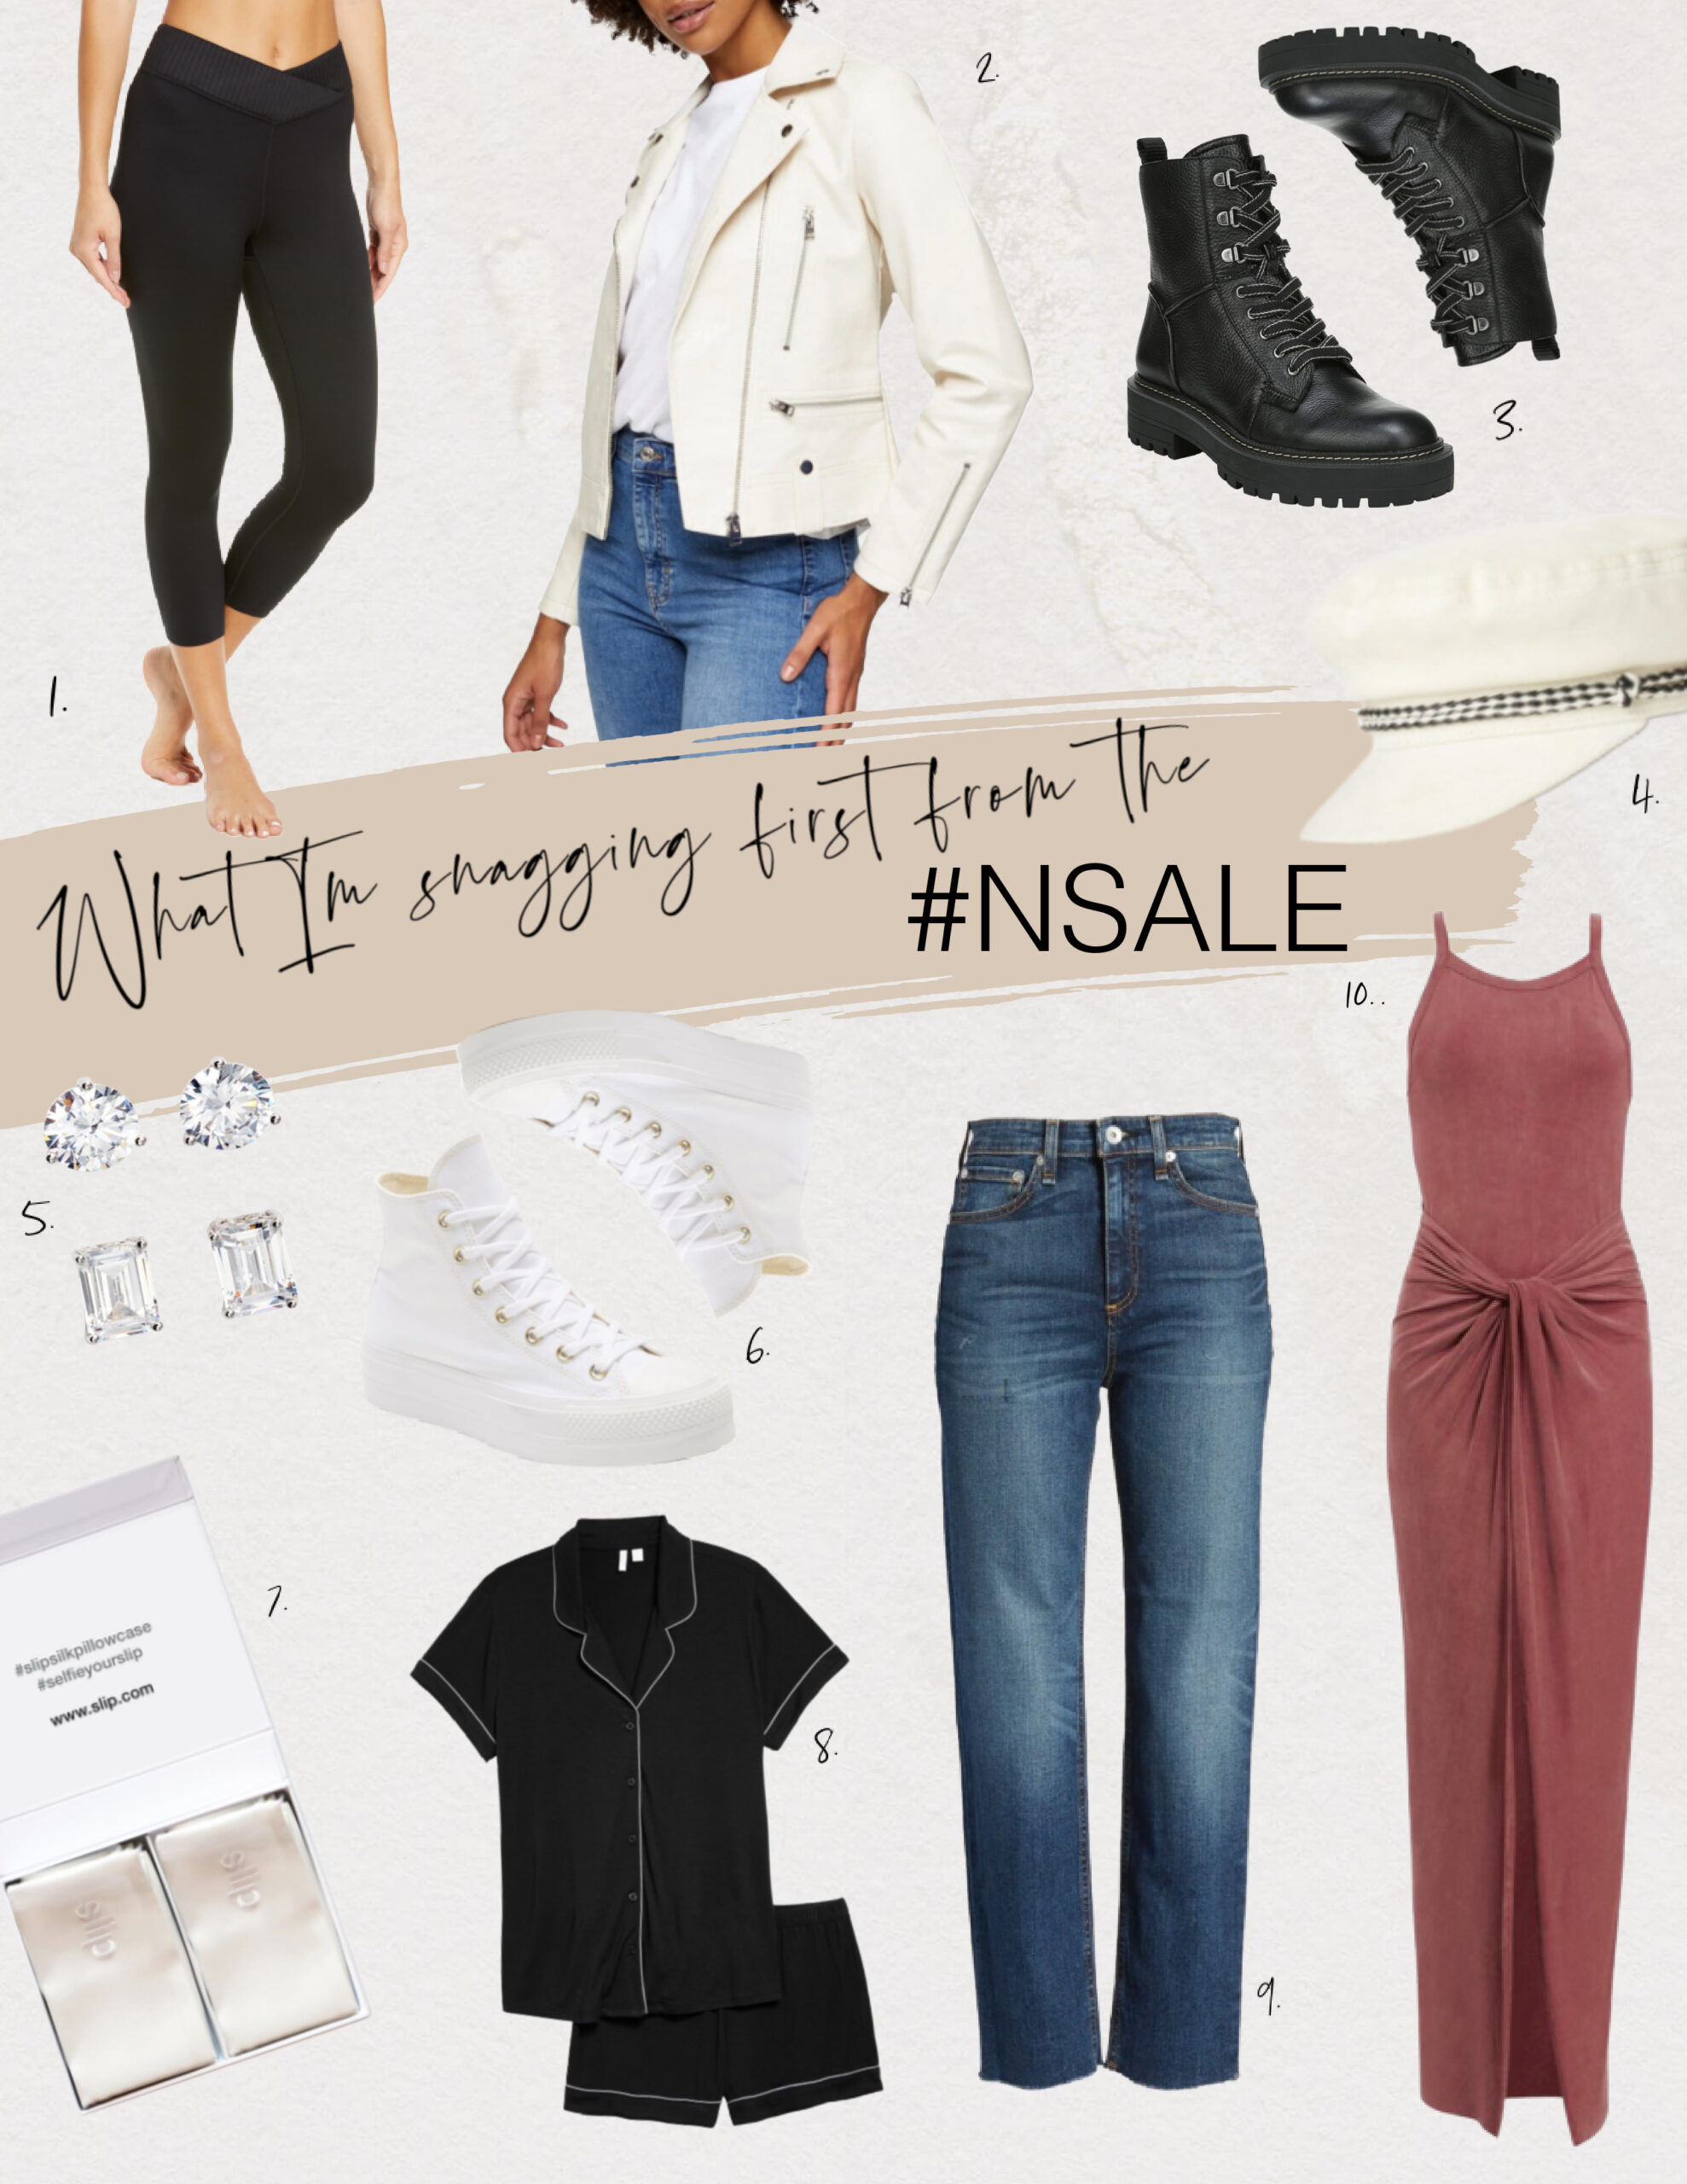 NORDSTROM SALE: MY TOP 10 | THE FIRST ITEMS I’M ADDING TO CART